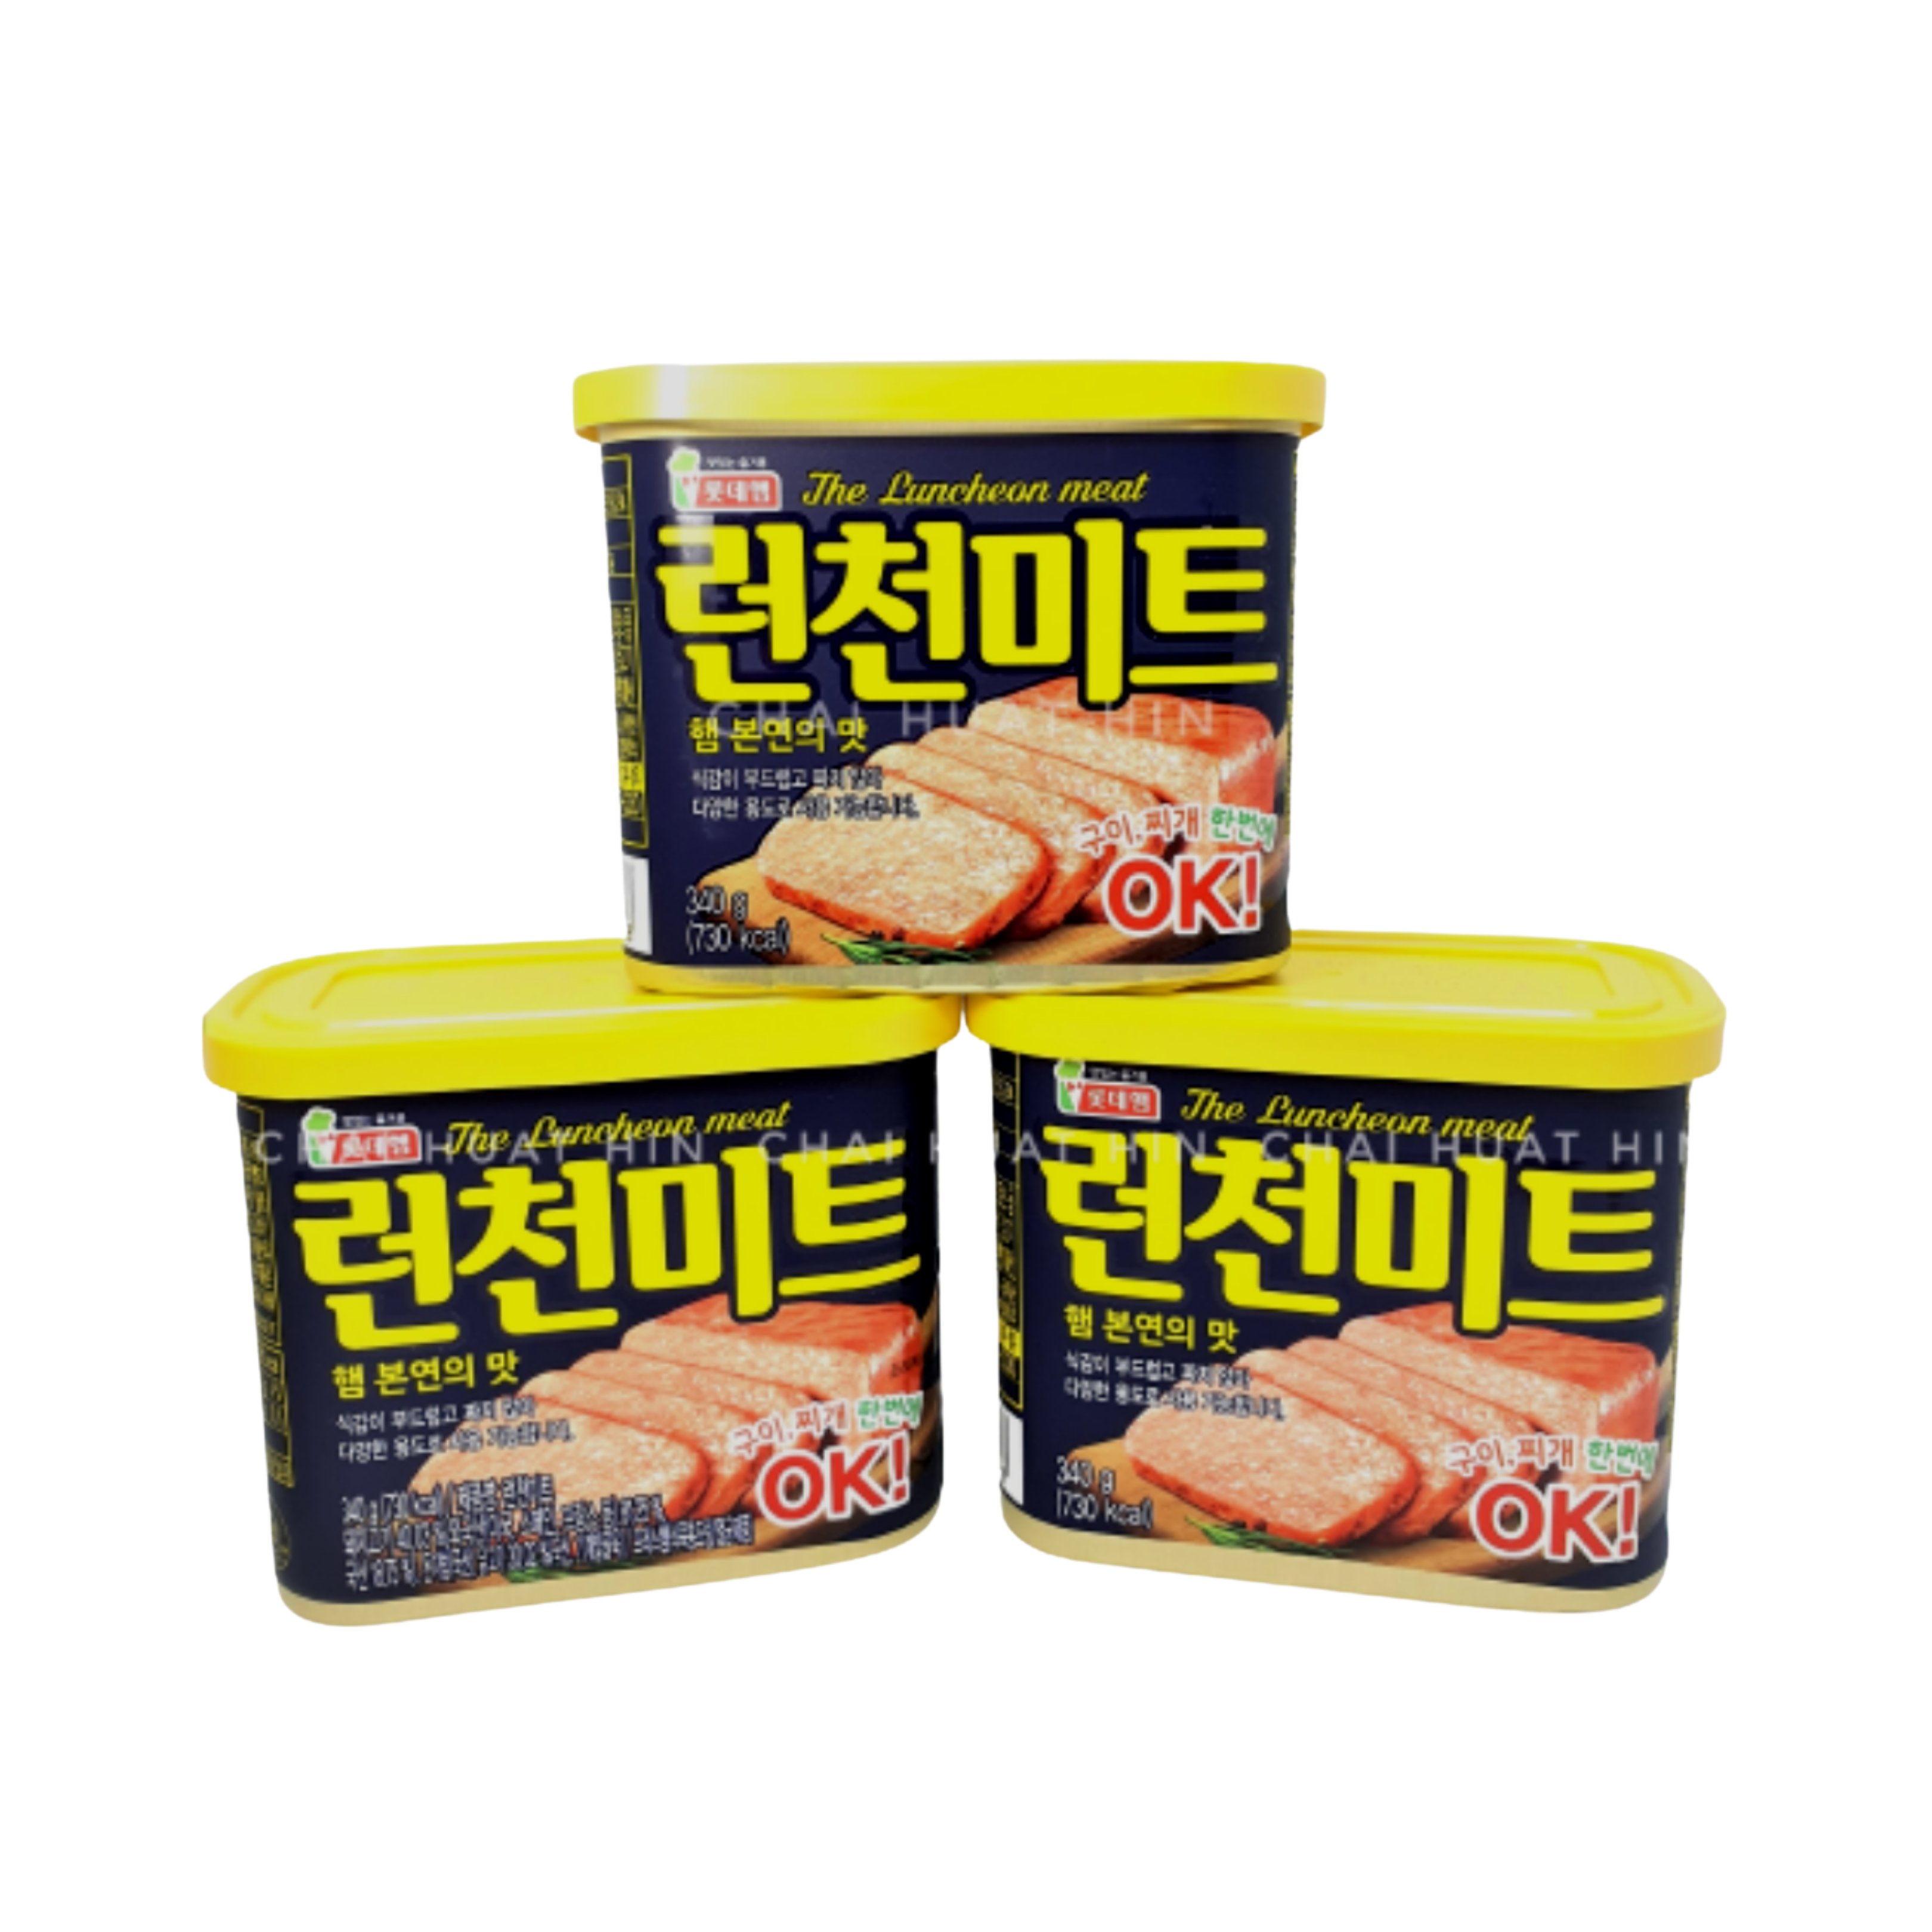 Lotte Pure Pork OK Luncheon Meat Promo Set [340g x 3 can]